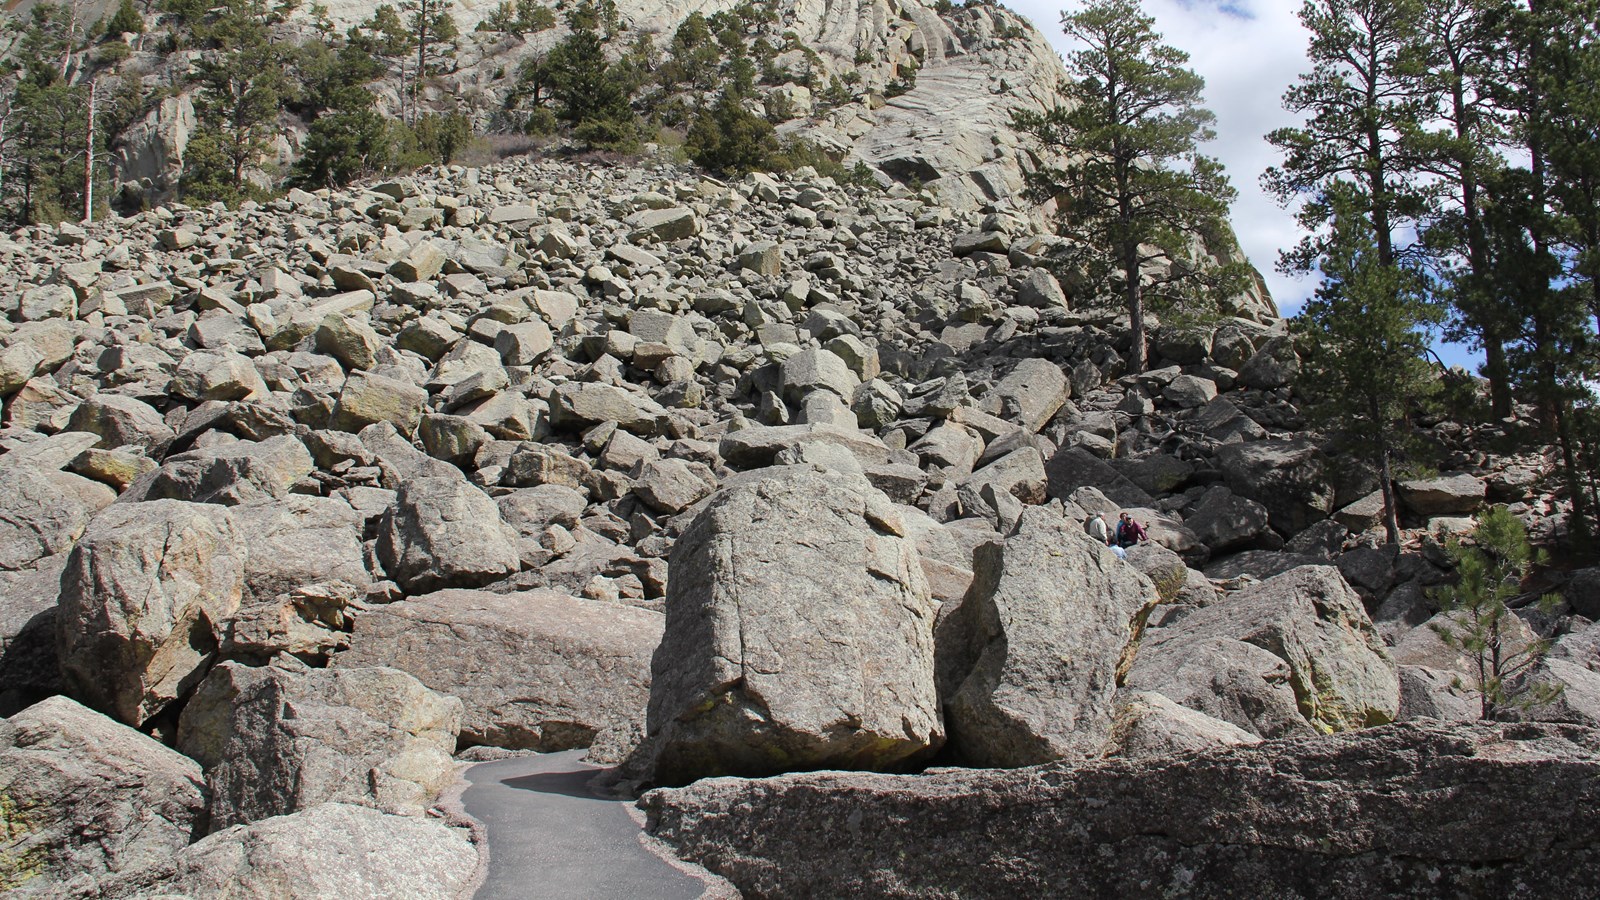 a field of boulders with a paved bath winding through, the base of Devils Tower in the background